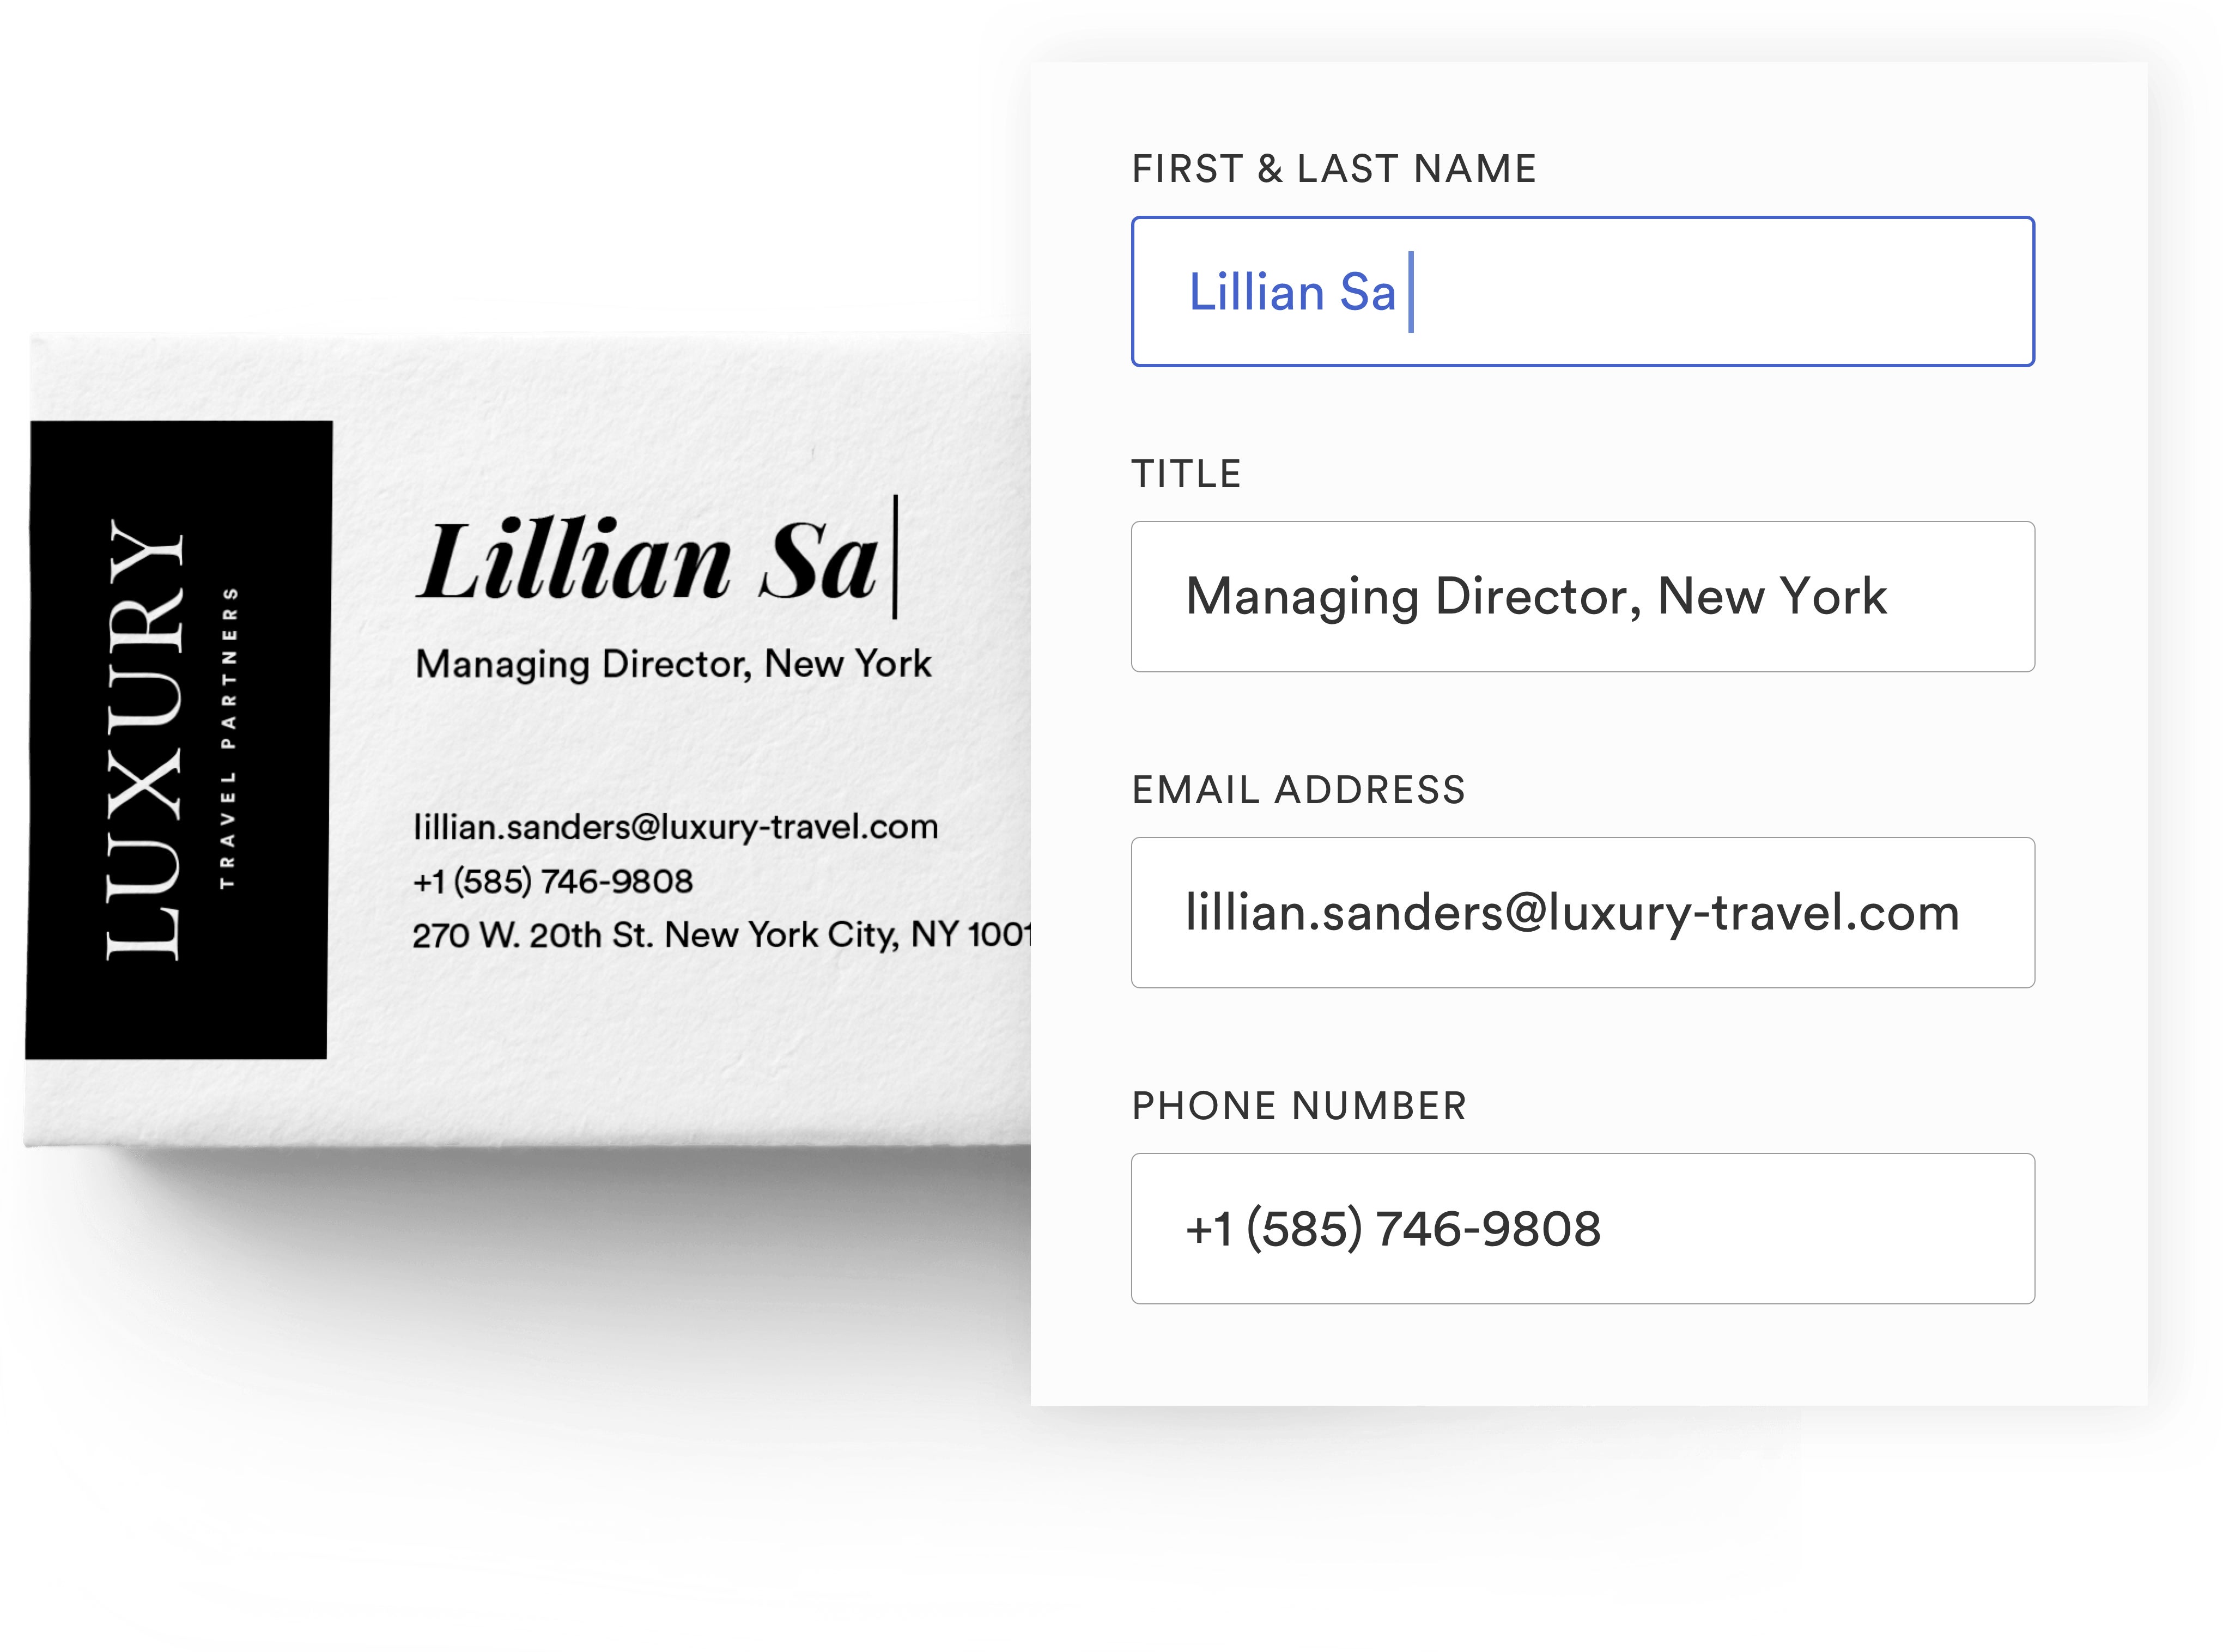 templating example with business card